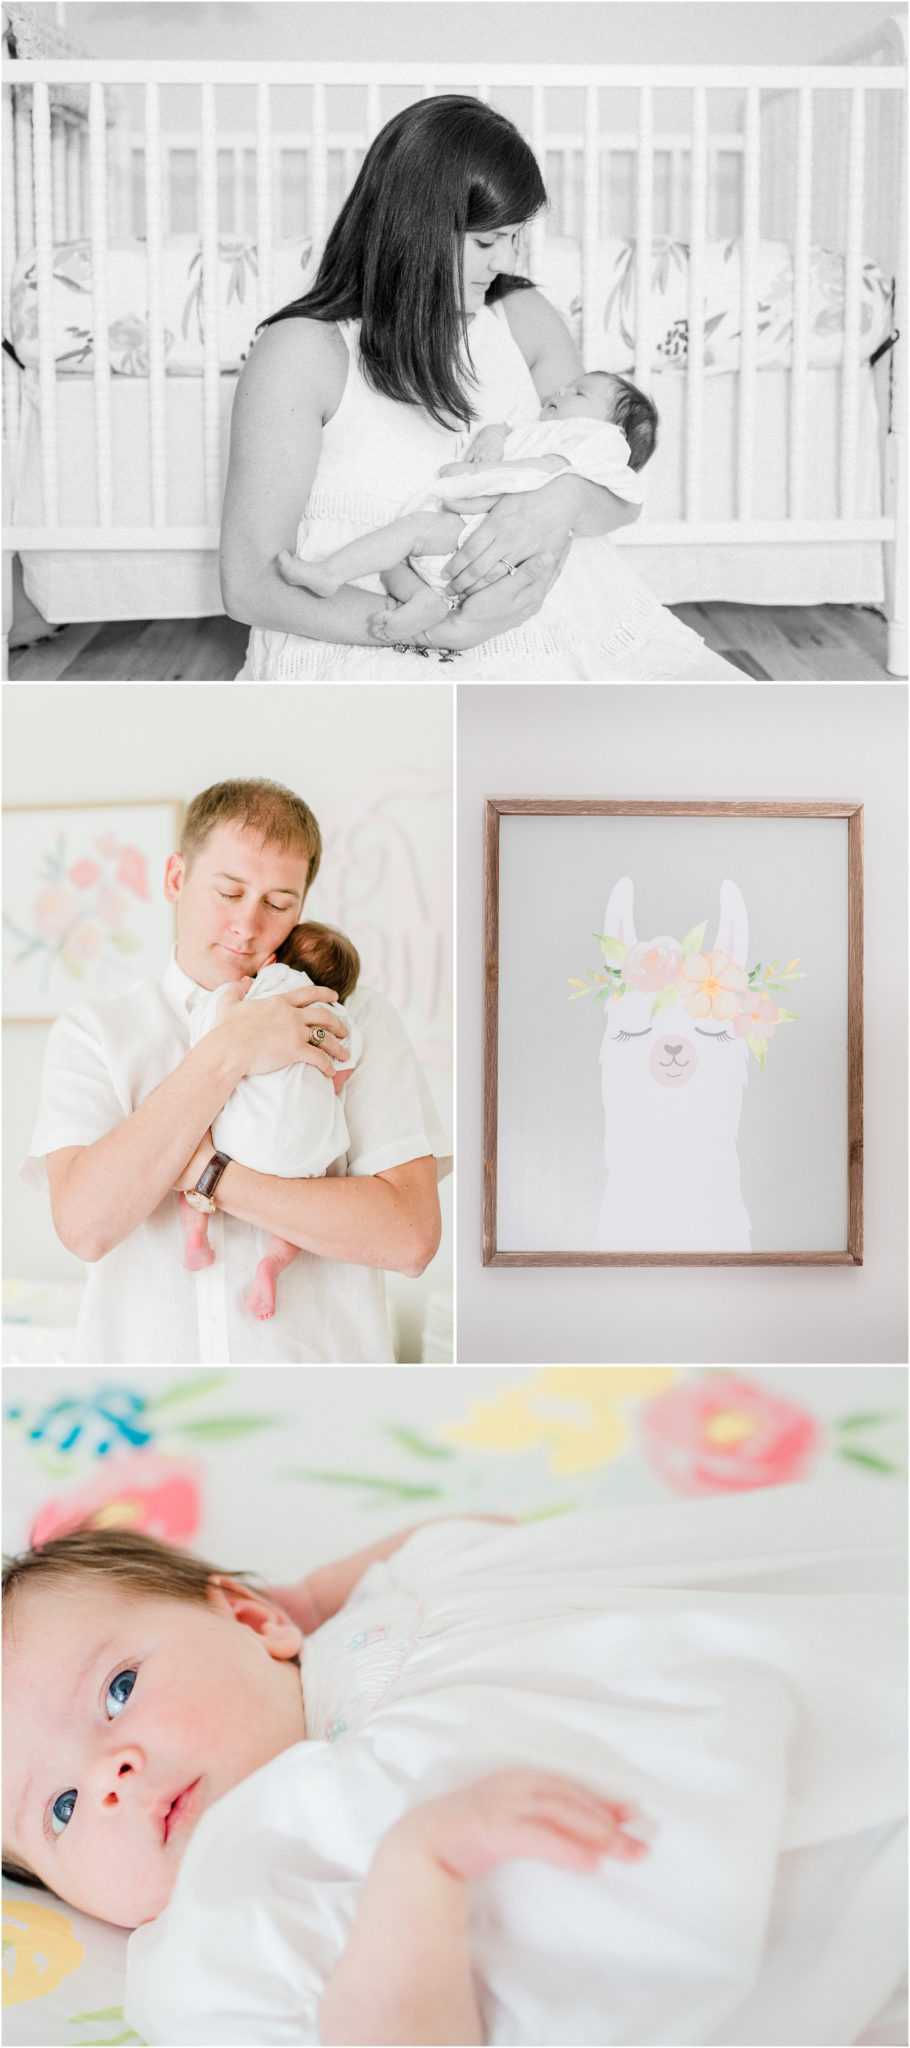 Lifestyle Clemson newborn session | In home Clemson newborn session | Clemson Newborn Photographer